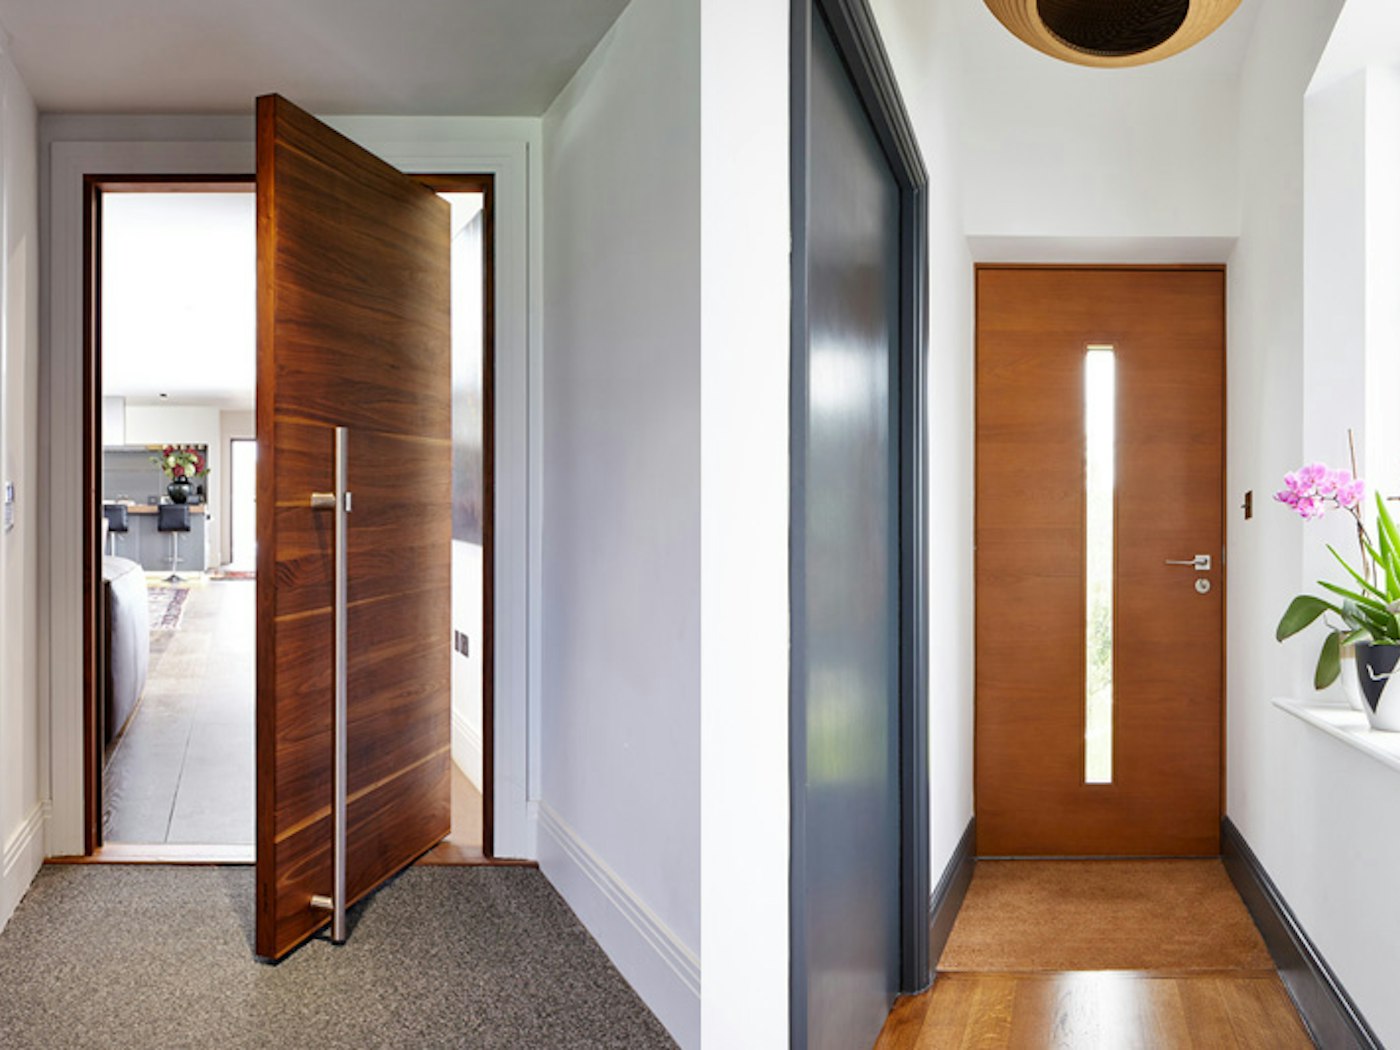 a gorgeous example of an internal pivot and on the right the internal doors match the skirting whilst the front door is a different style and colour